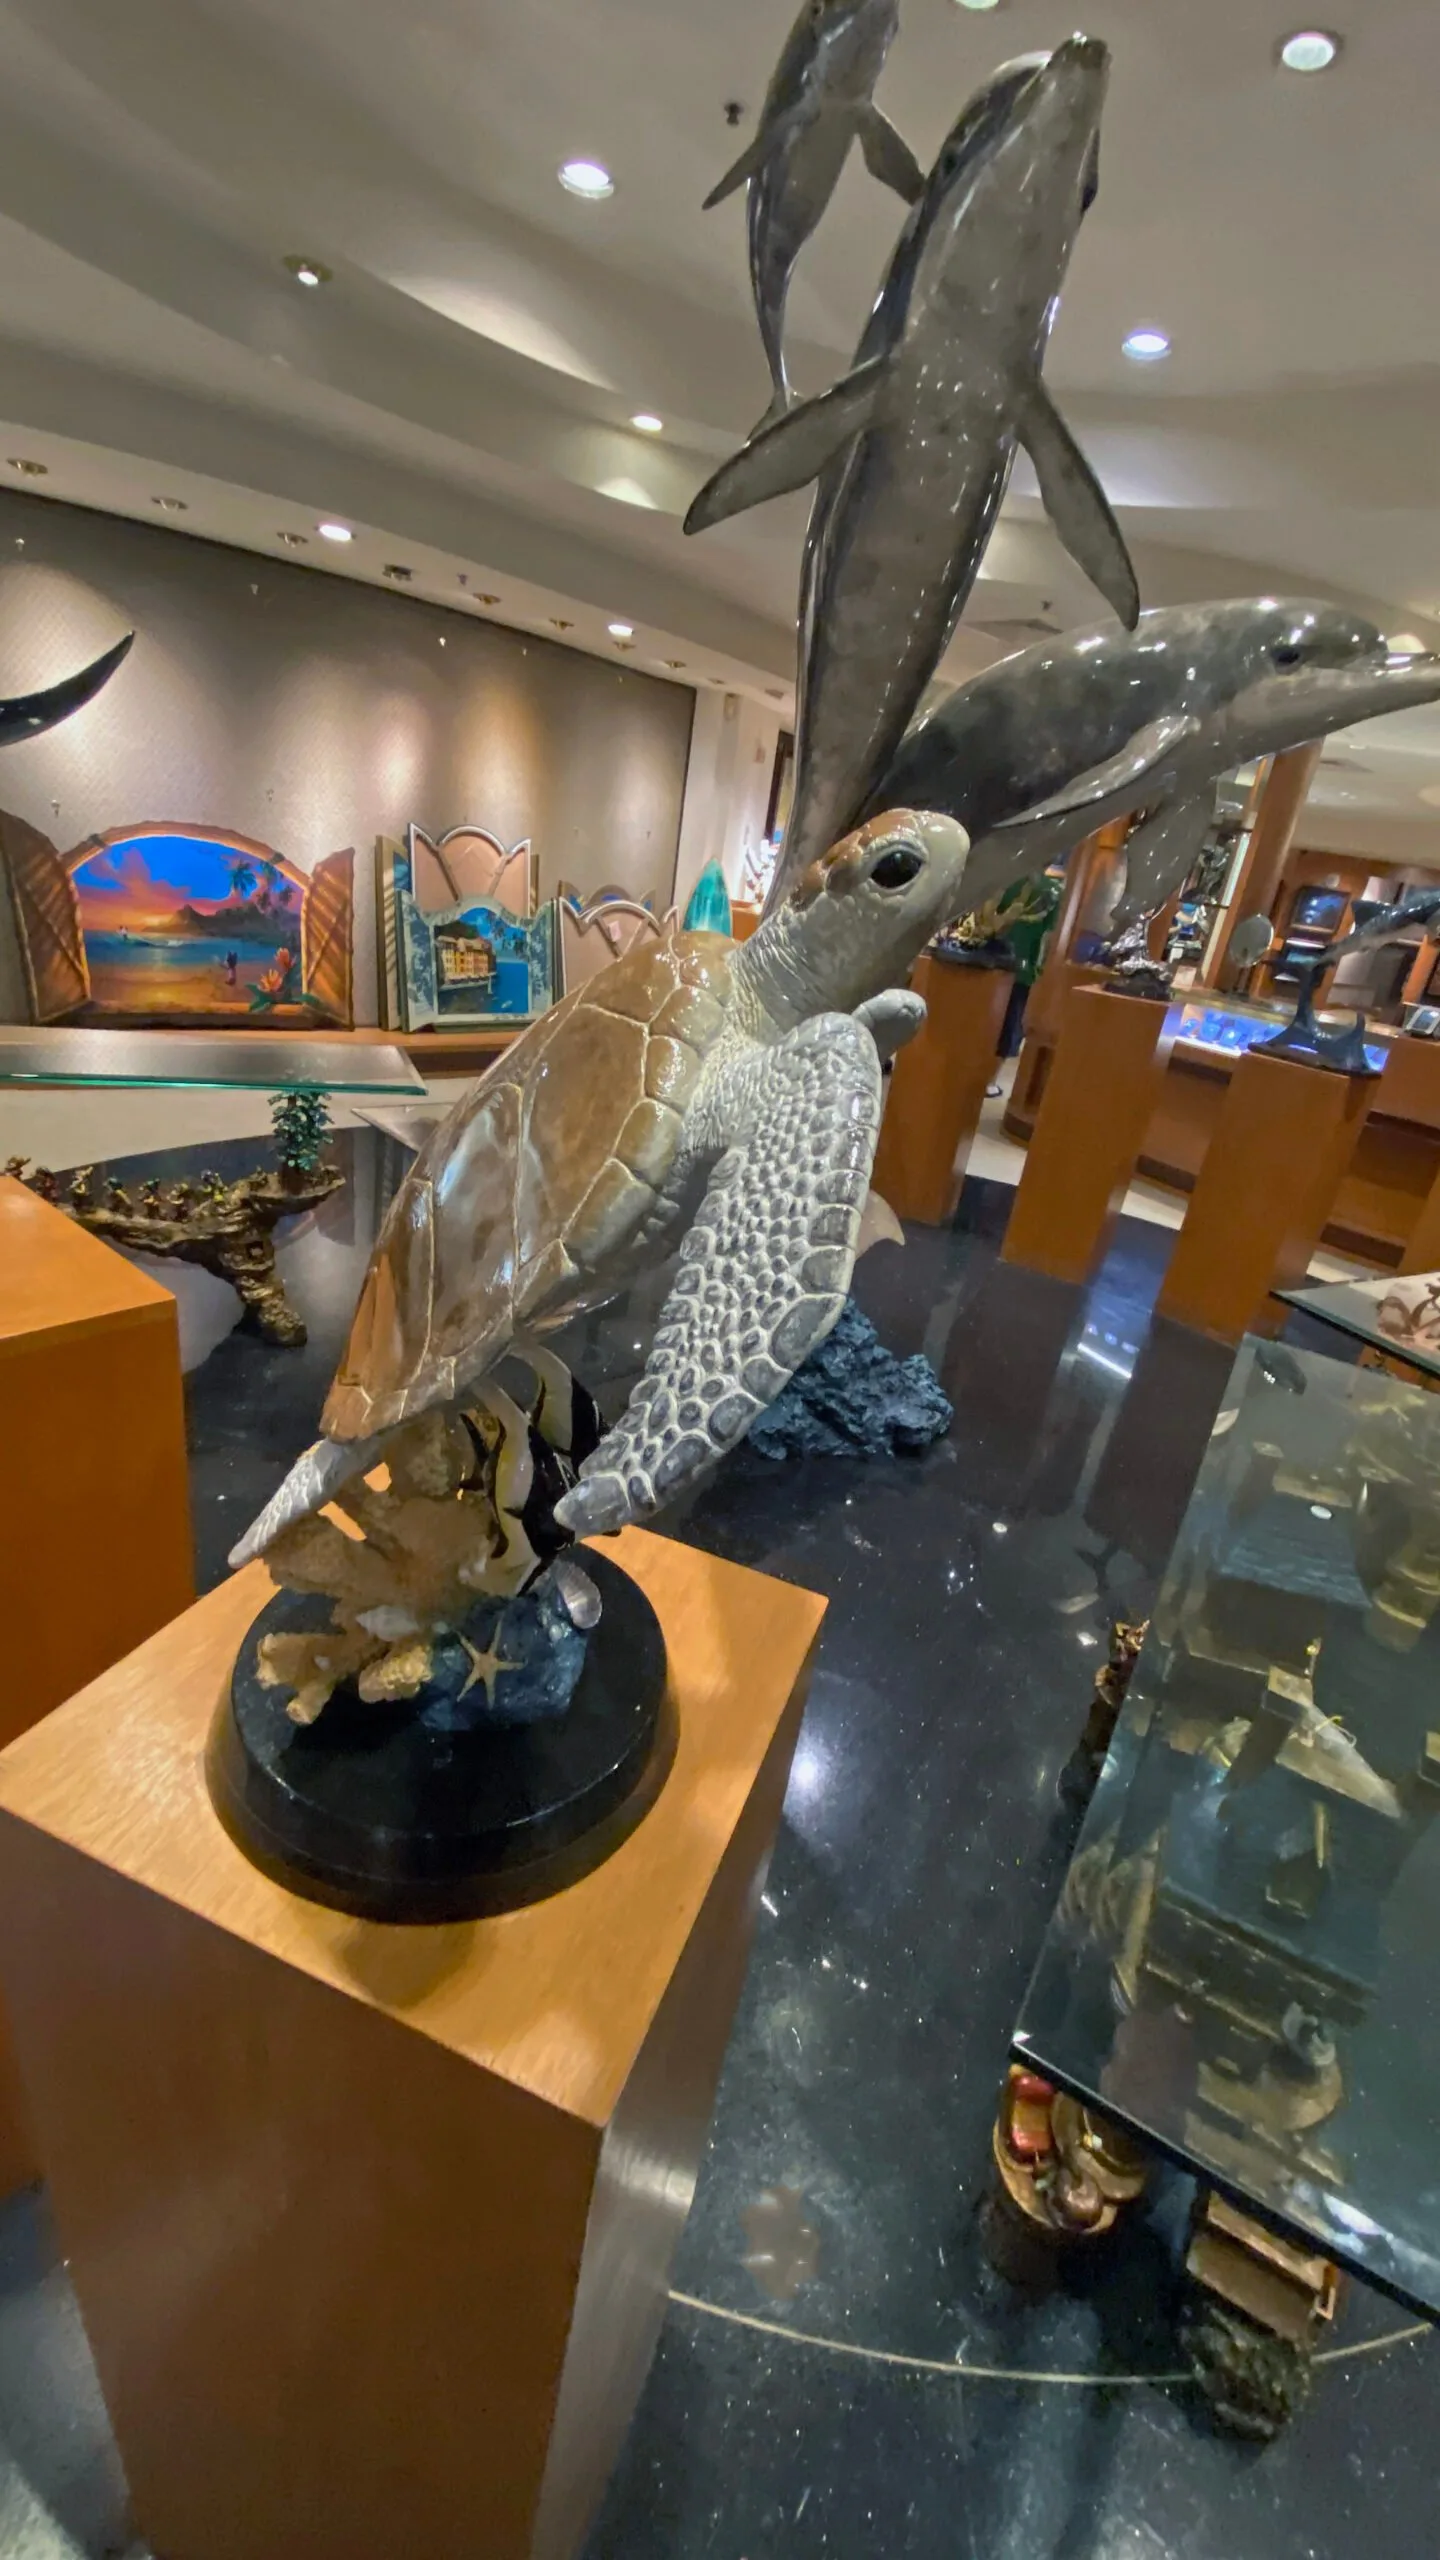 Check out the Unique Wyland Galleries of Florida at Disney's Boardwalk Resort